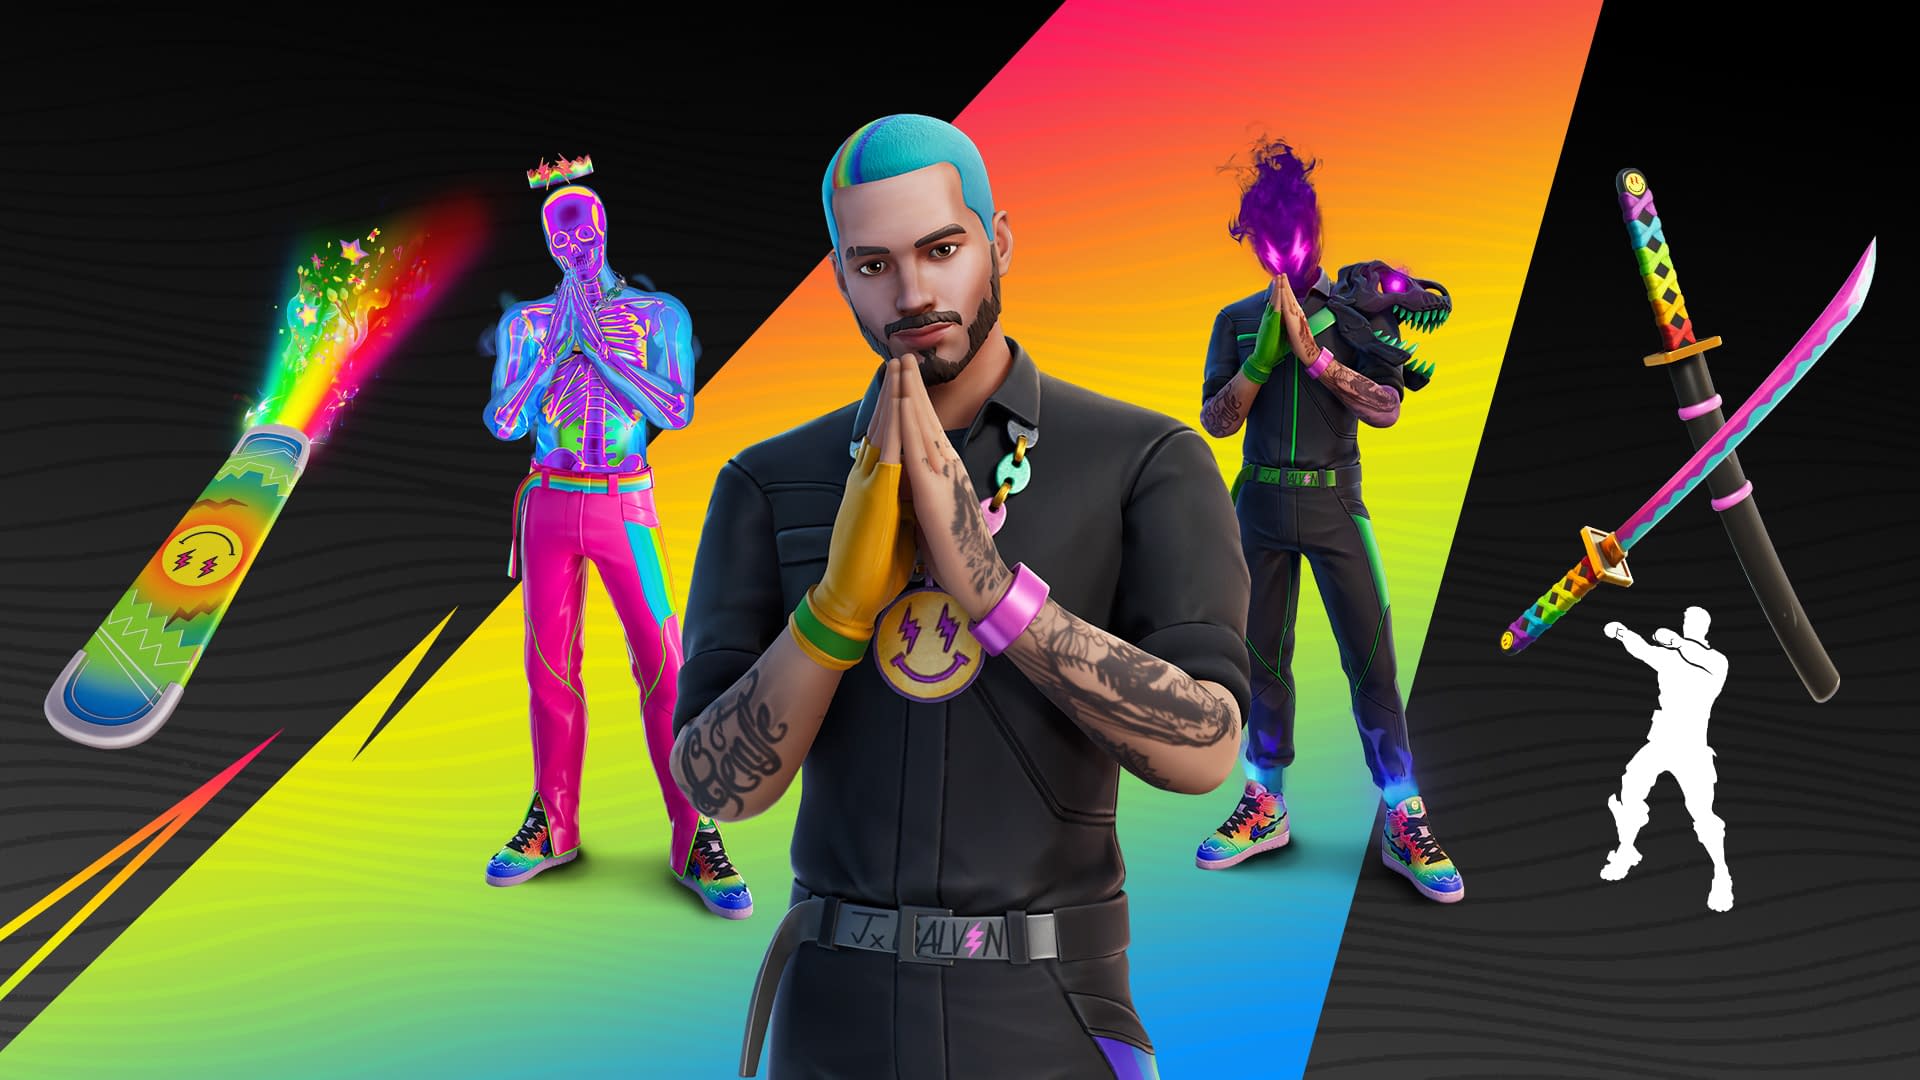 J Balvin Joins The Fortnite Icon Series This Week